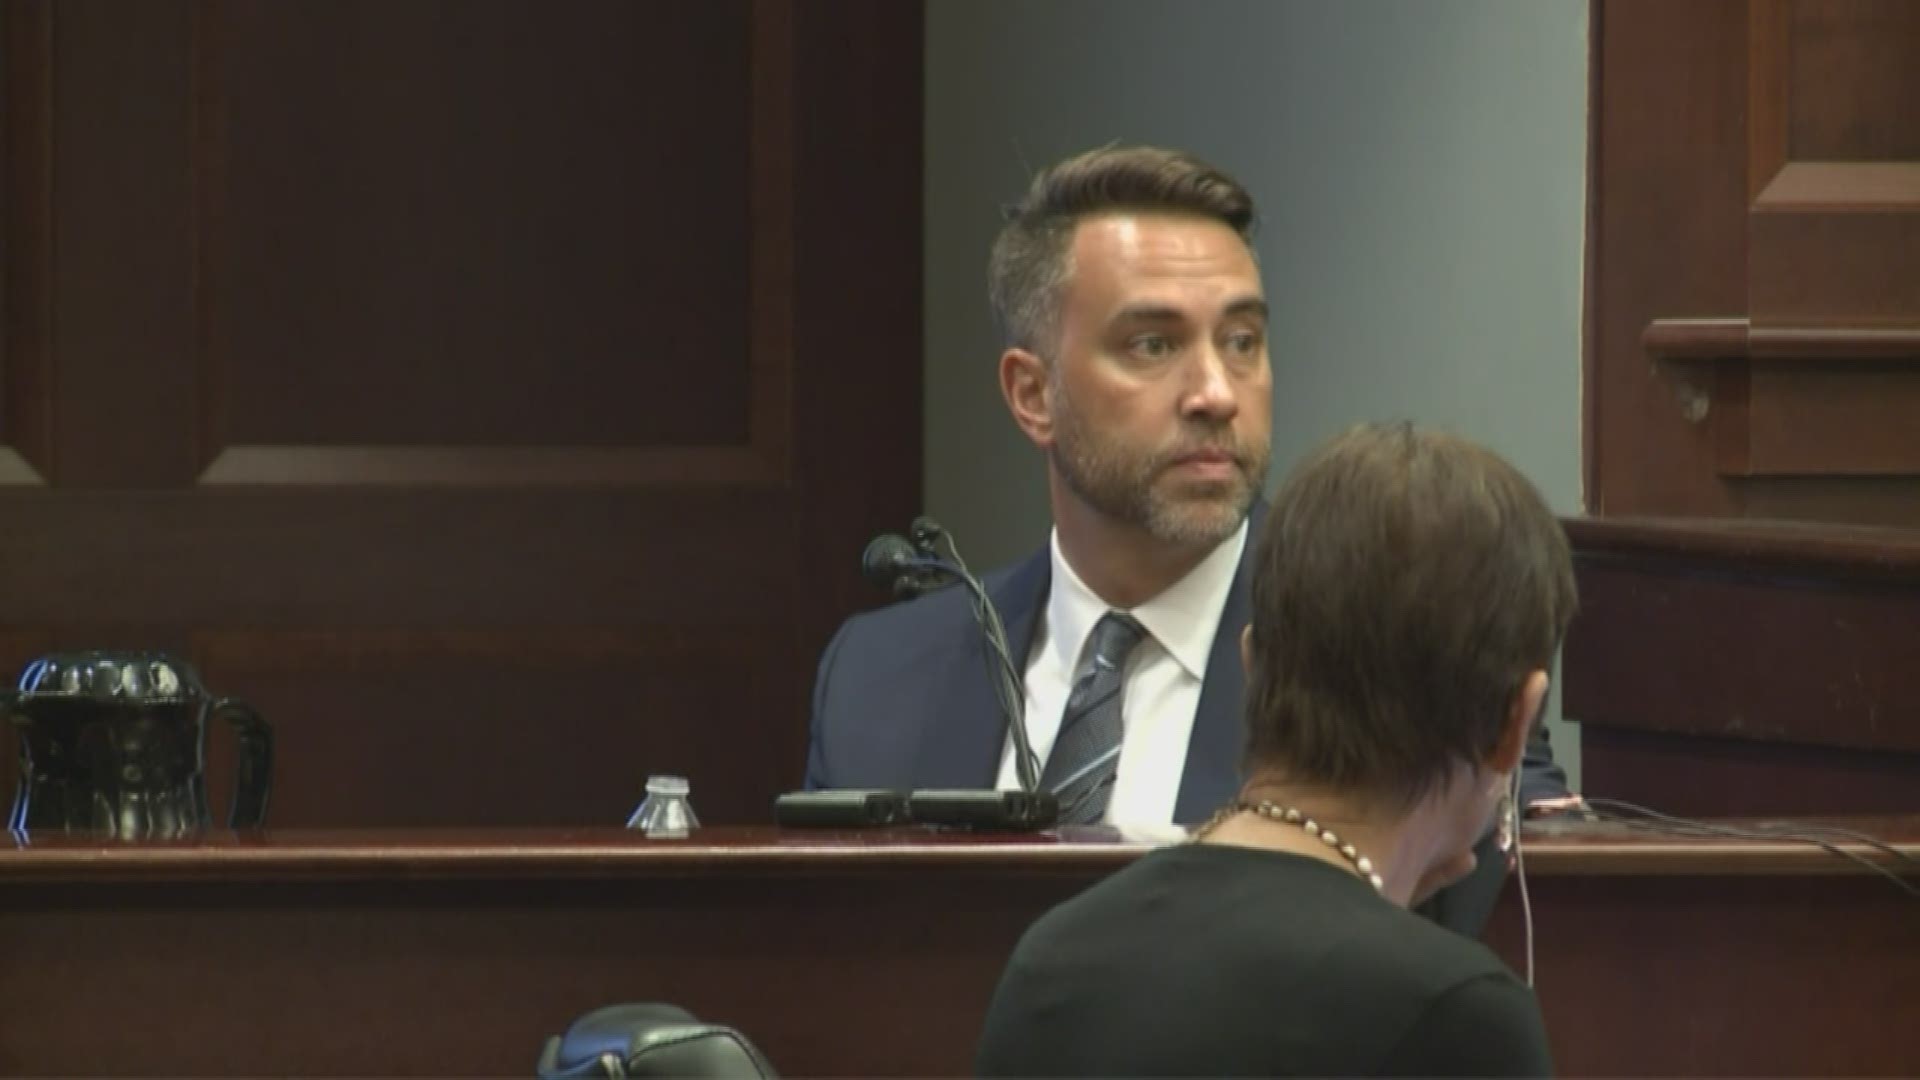 Testimony from the trial of Joseph and Jennifer Rosenbaum on July 19, 2019. They're accused in the death of 2-year-old Laila Daniel.